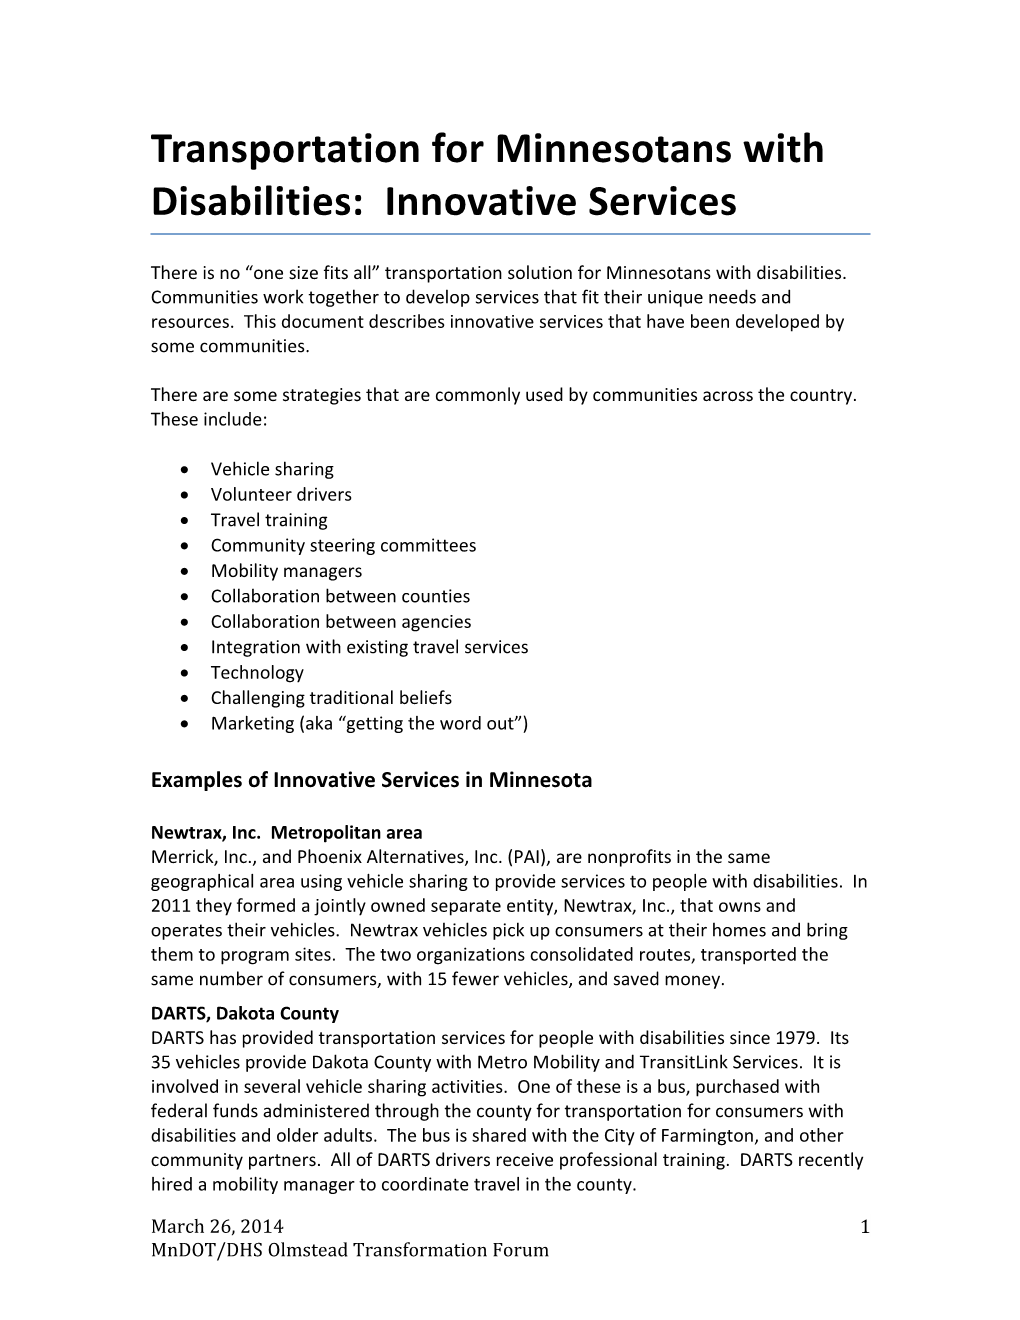 Transportation for Minnesotans with Disabilities: Innovative Services